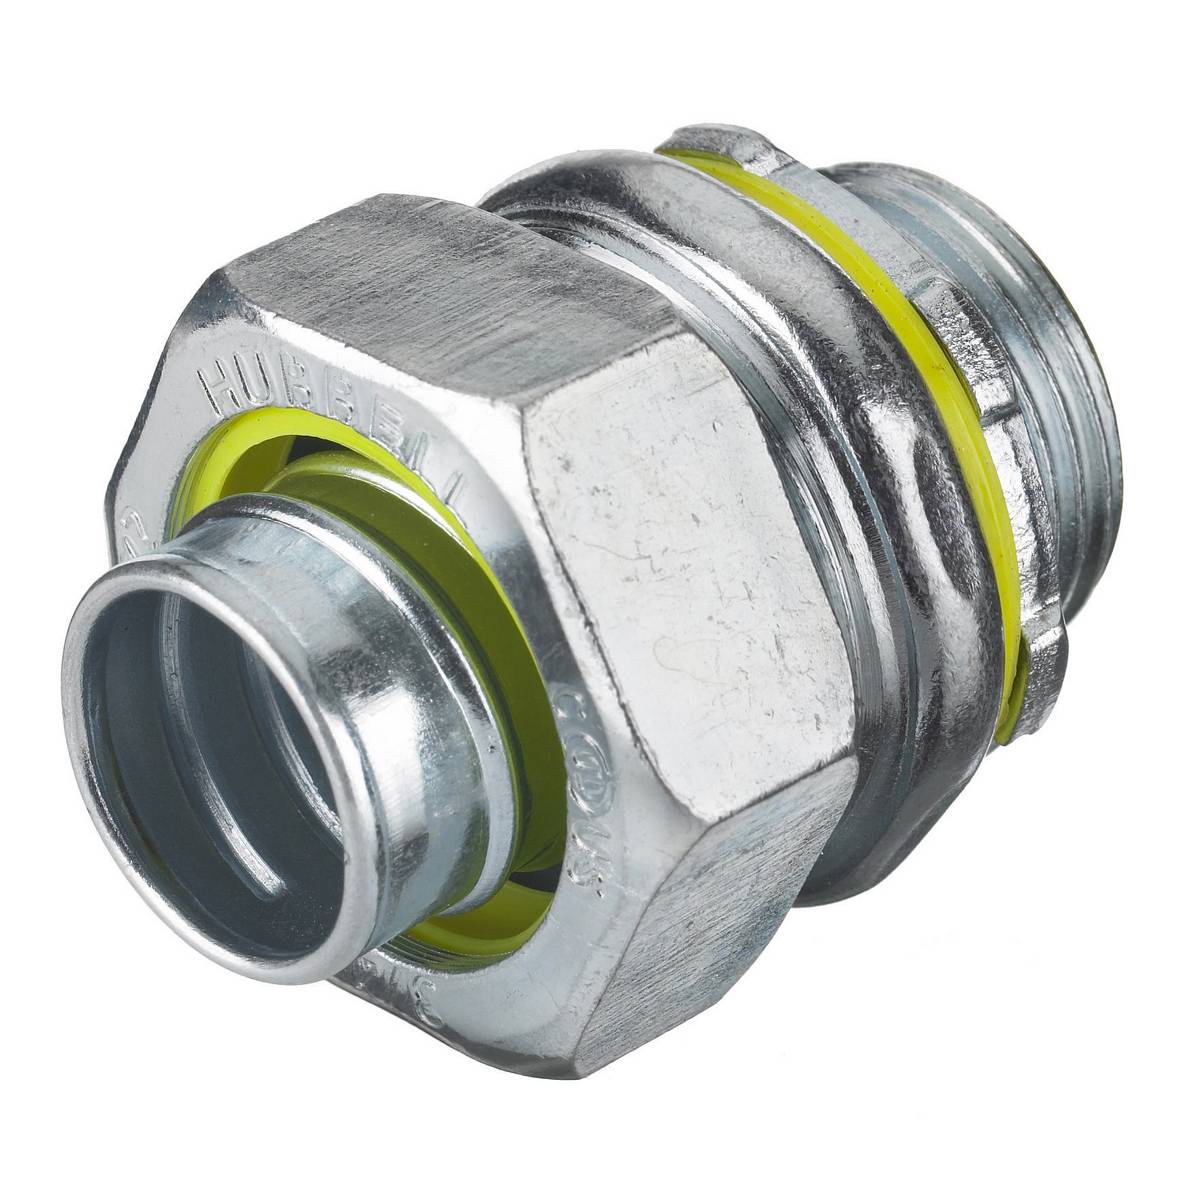 Wiring Device-Kellems H250 Non-Insulated Straight Male Metallic Liquidtight Connector, 2-1/2 in Trade, Iron/Steel, Zinc Plated